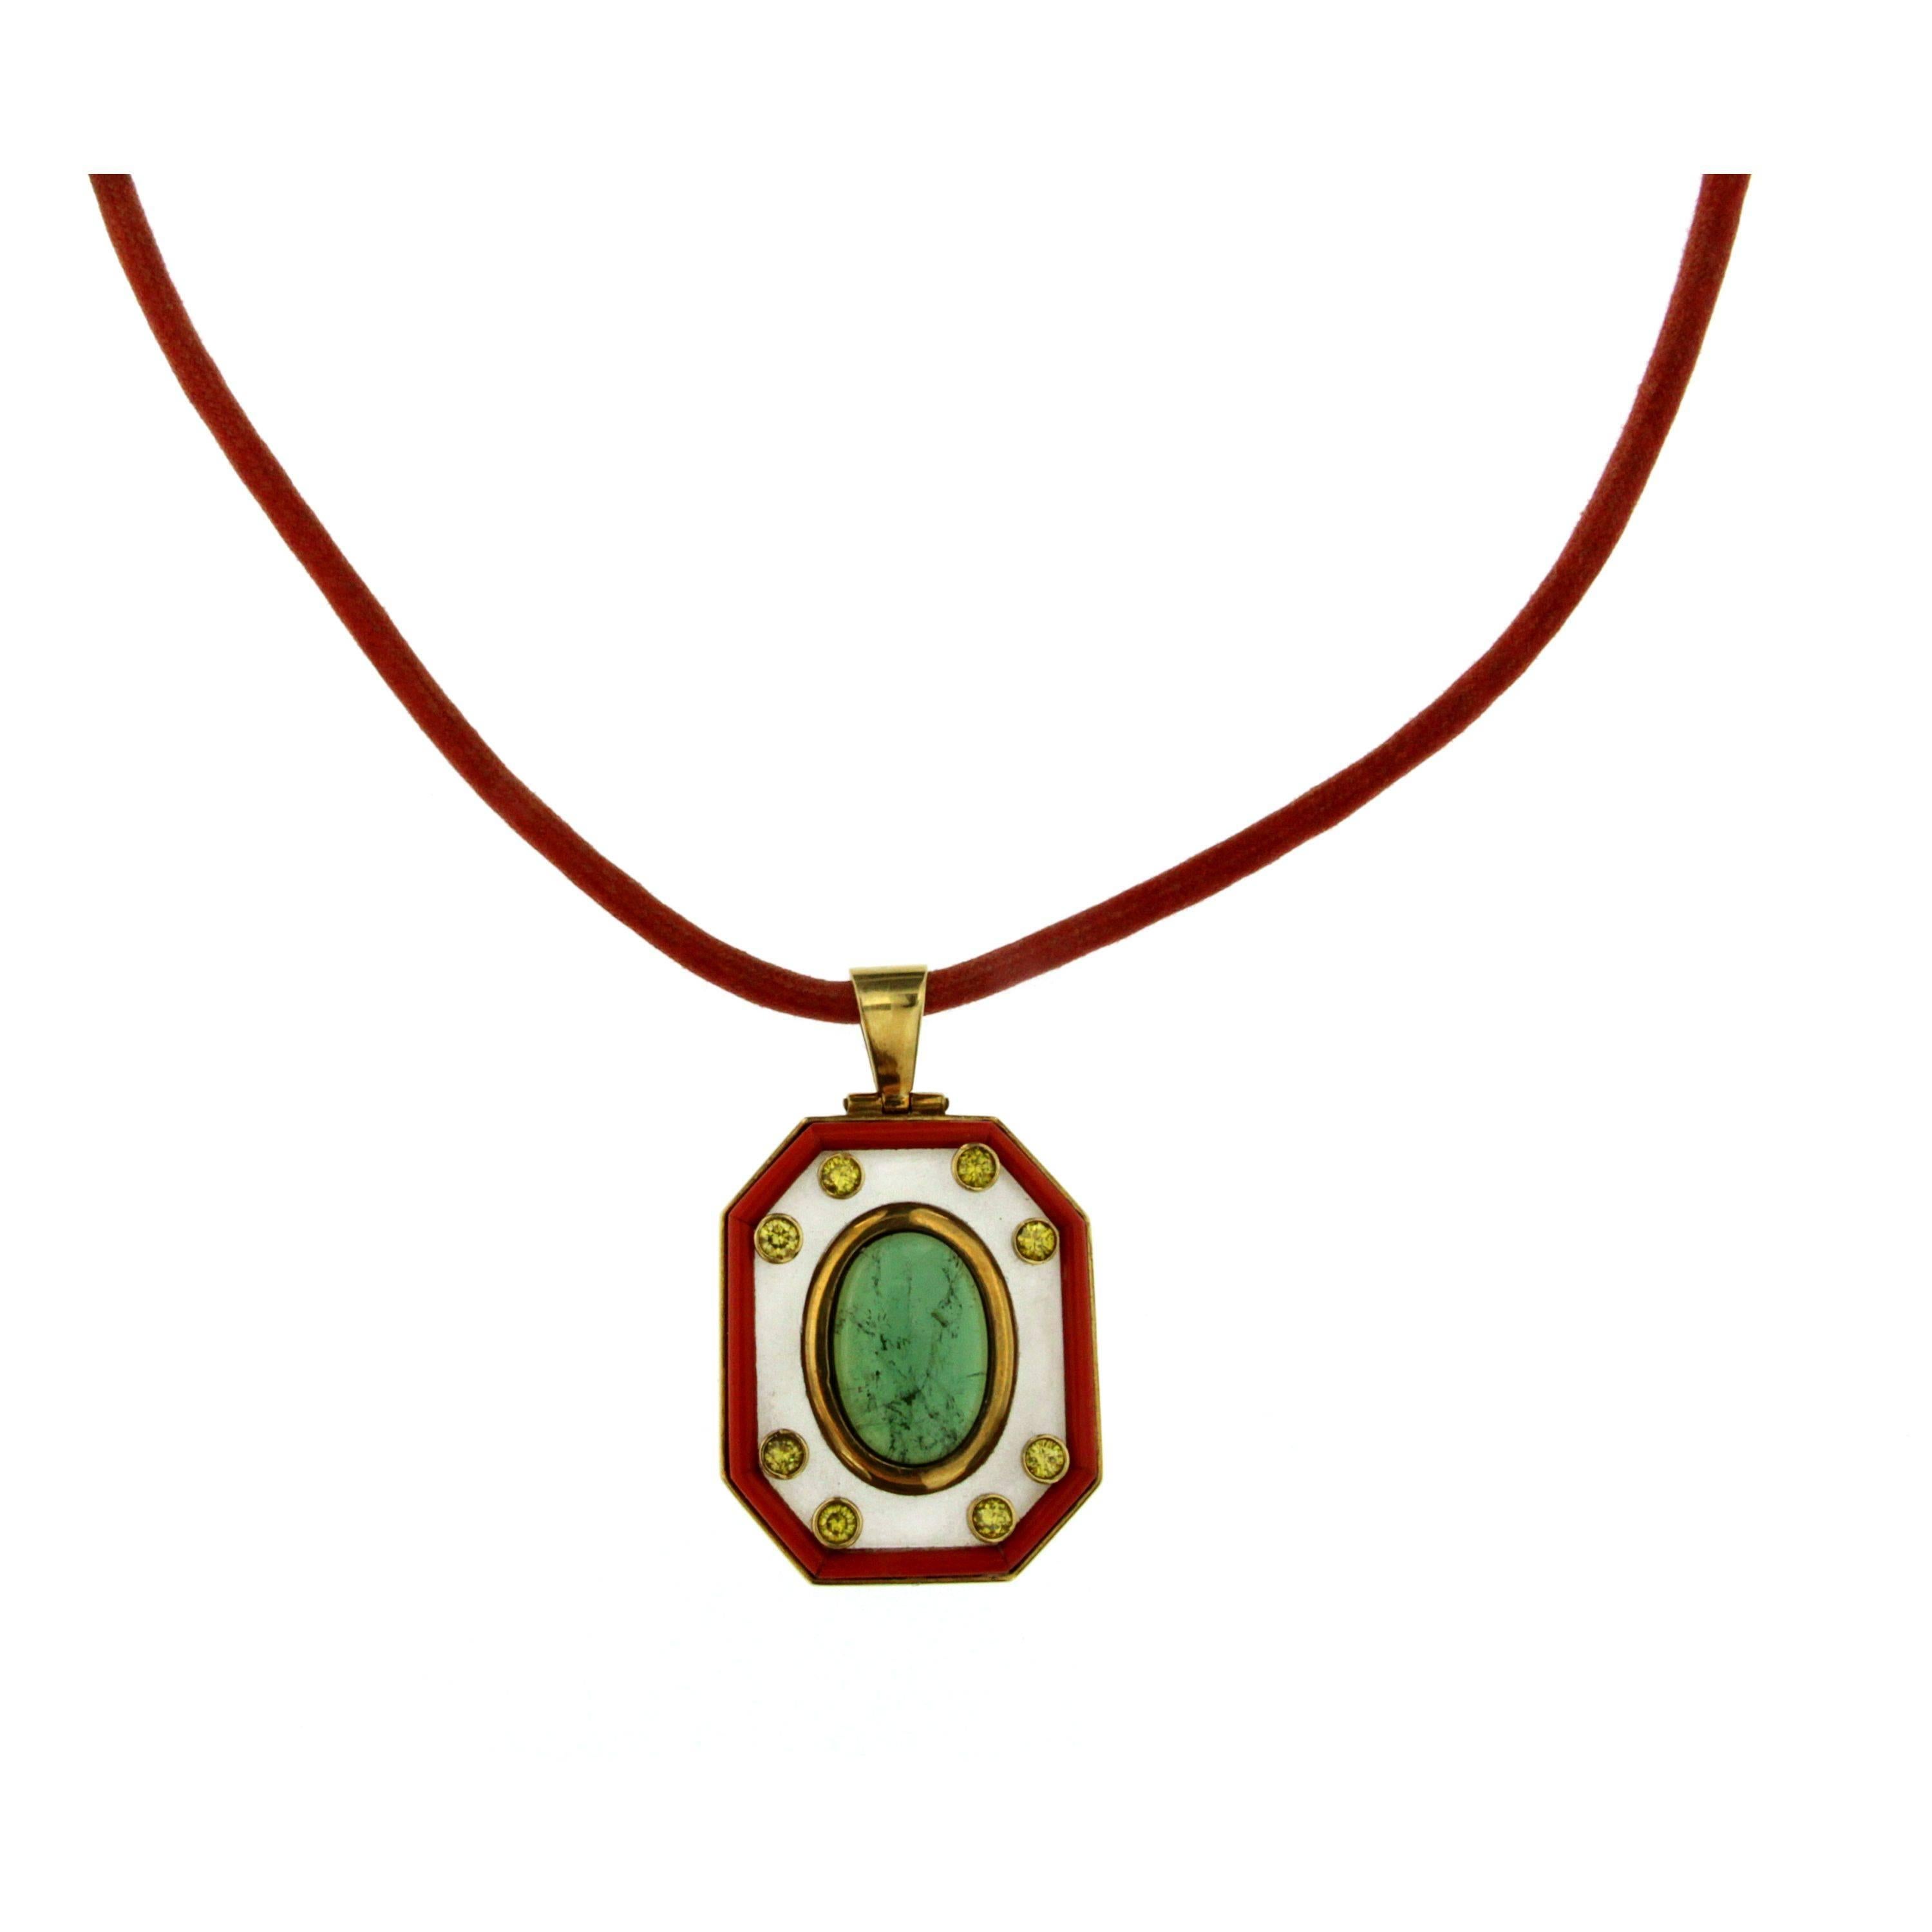 This geometric design pendant has been hand-crafted with tourmaline, diamonds, ialine quartz, coral and 18k yellow gold. 
The pendant is suspended by a 15.75 inch waxed cotton necklace cord.
Circa 1970s

CONDITION: Pre-owned - Excellent
GEM STONES: